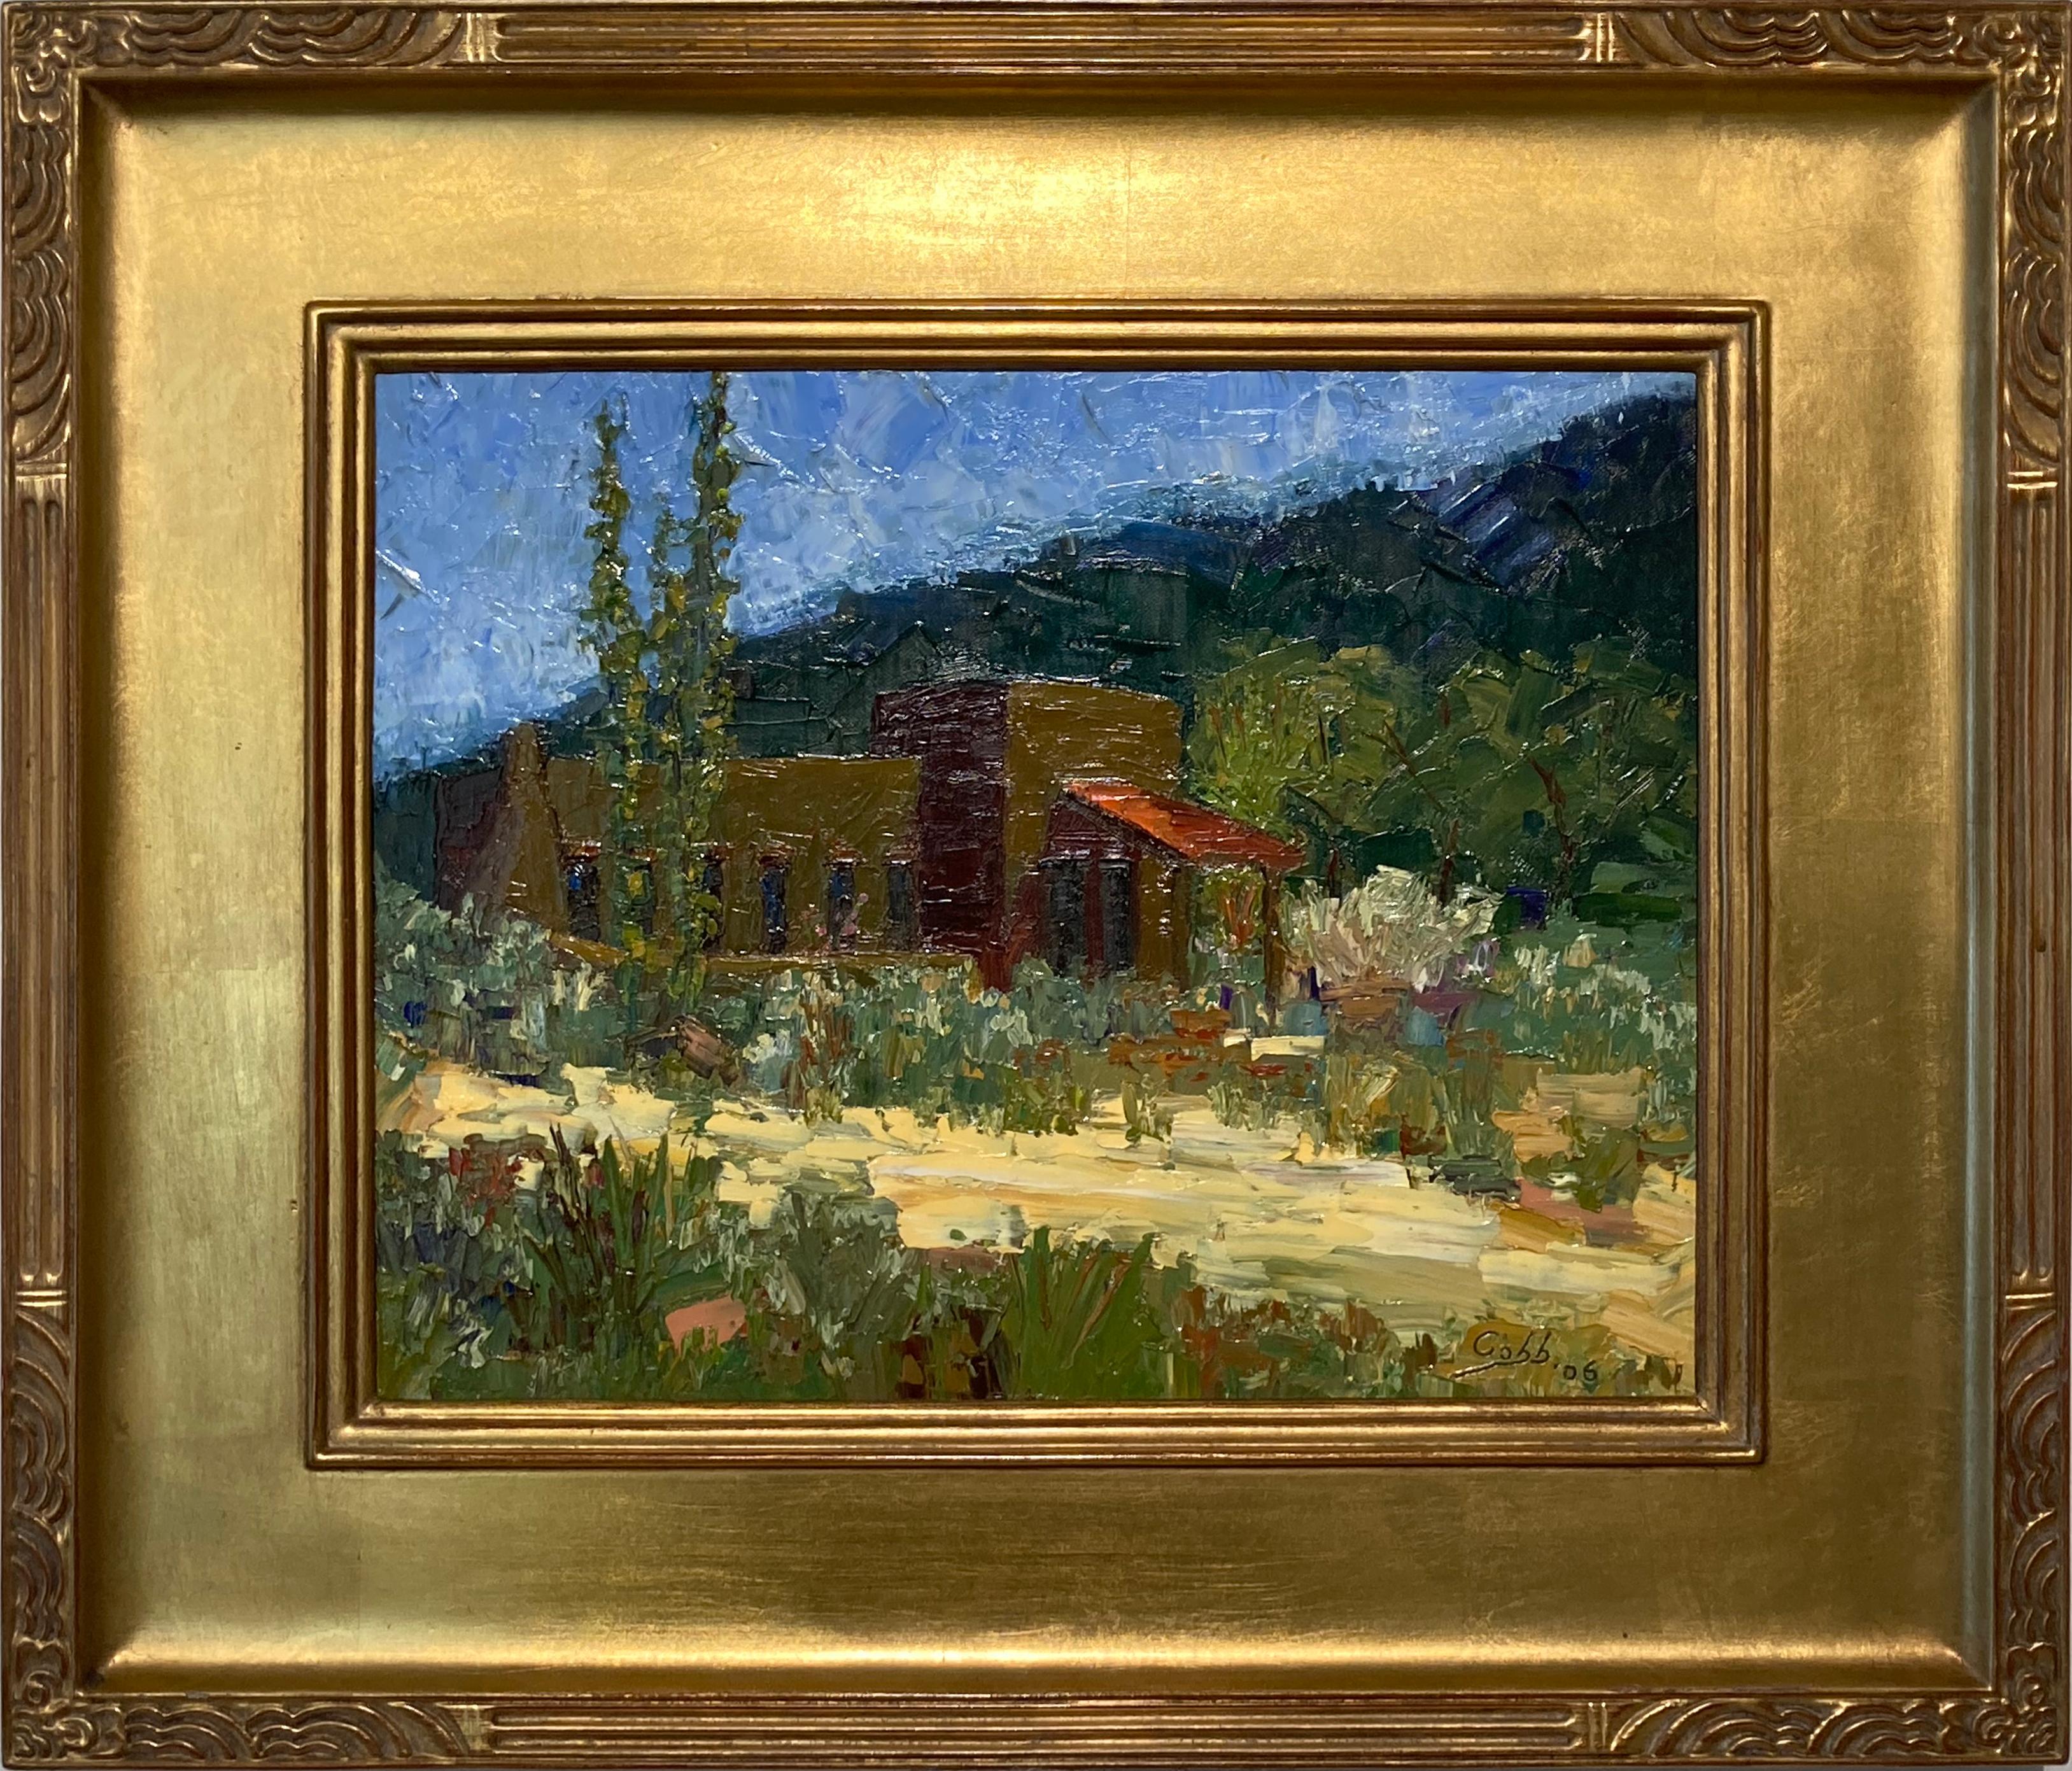 'Century Old Adobe, ' by James Cobb, Oil on Panel Painting